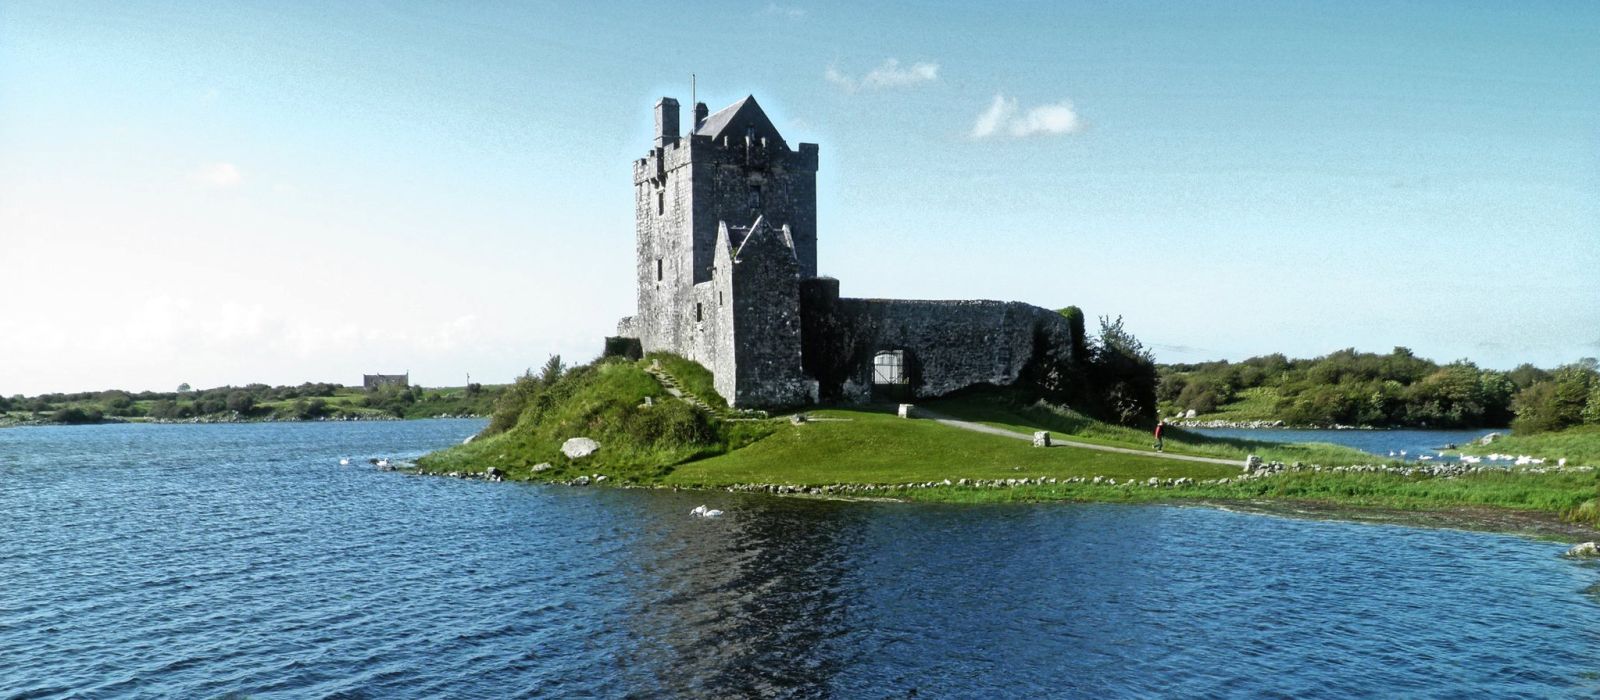 Make your own tour of Connacht with Discover Ireland Tours Destination Management Company